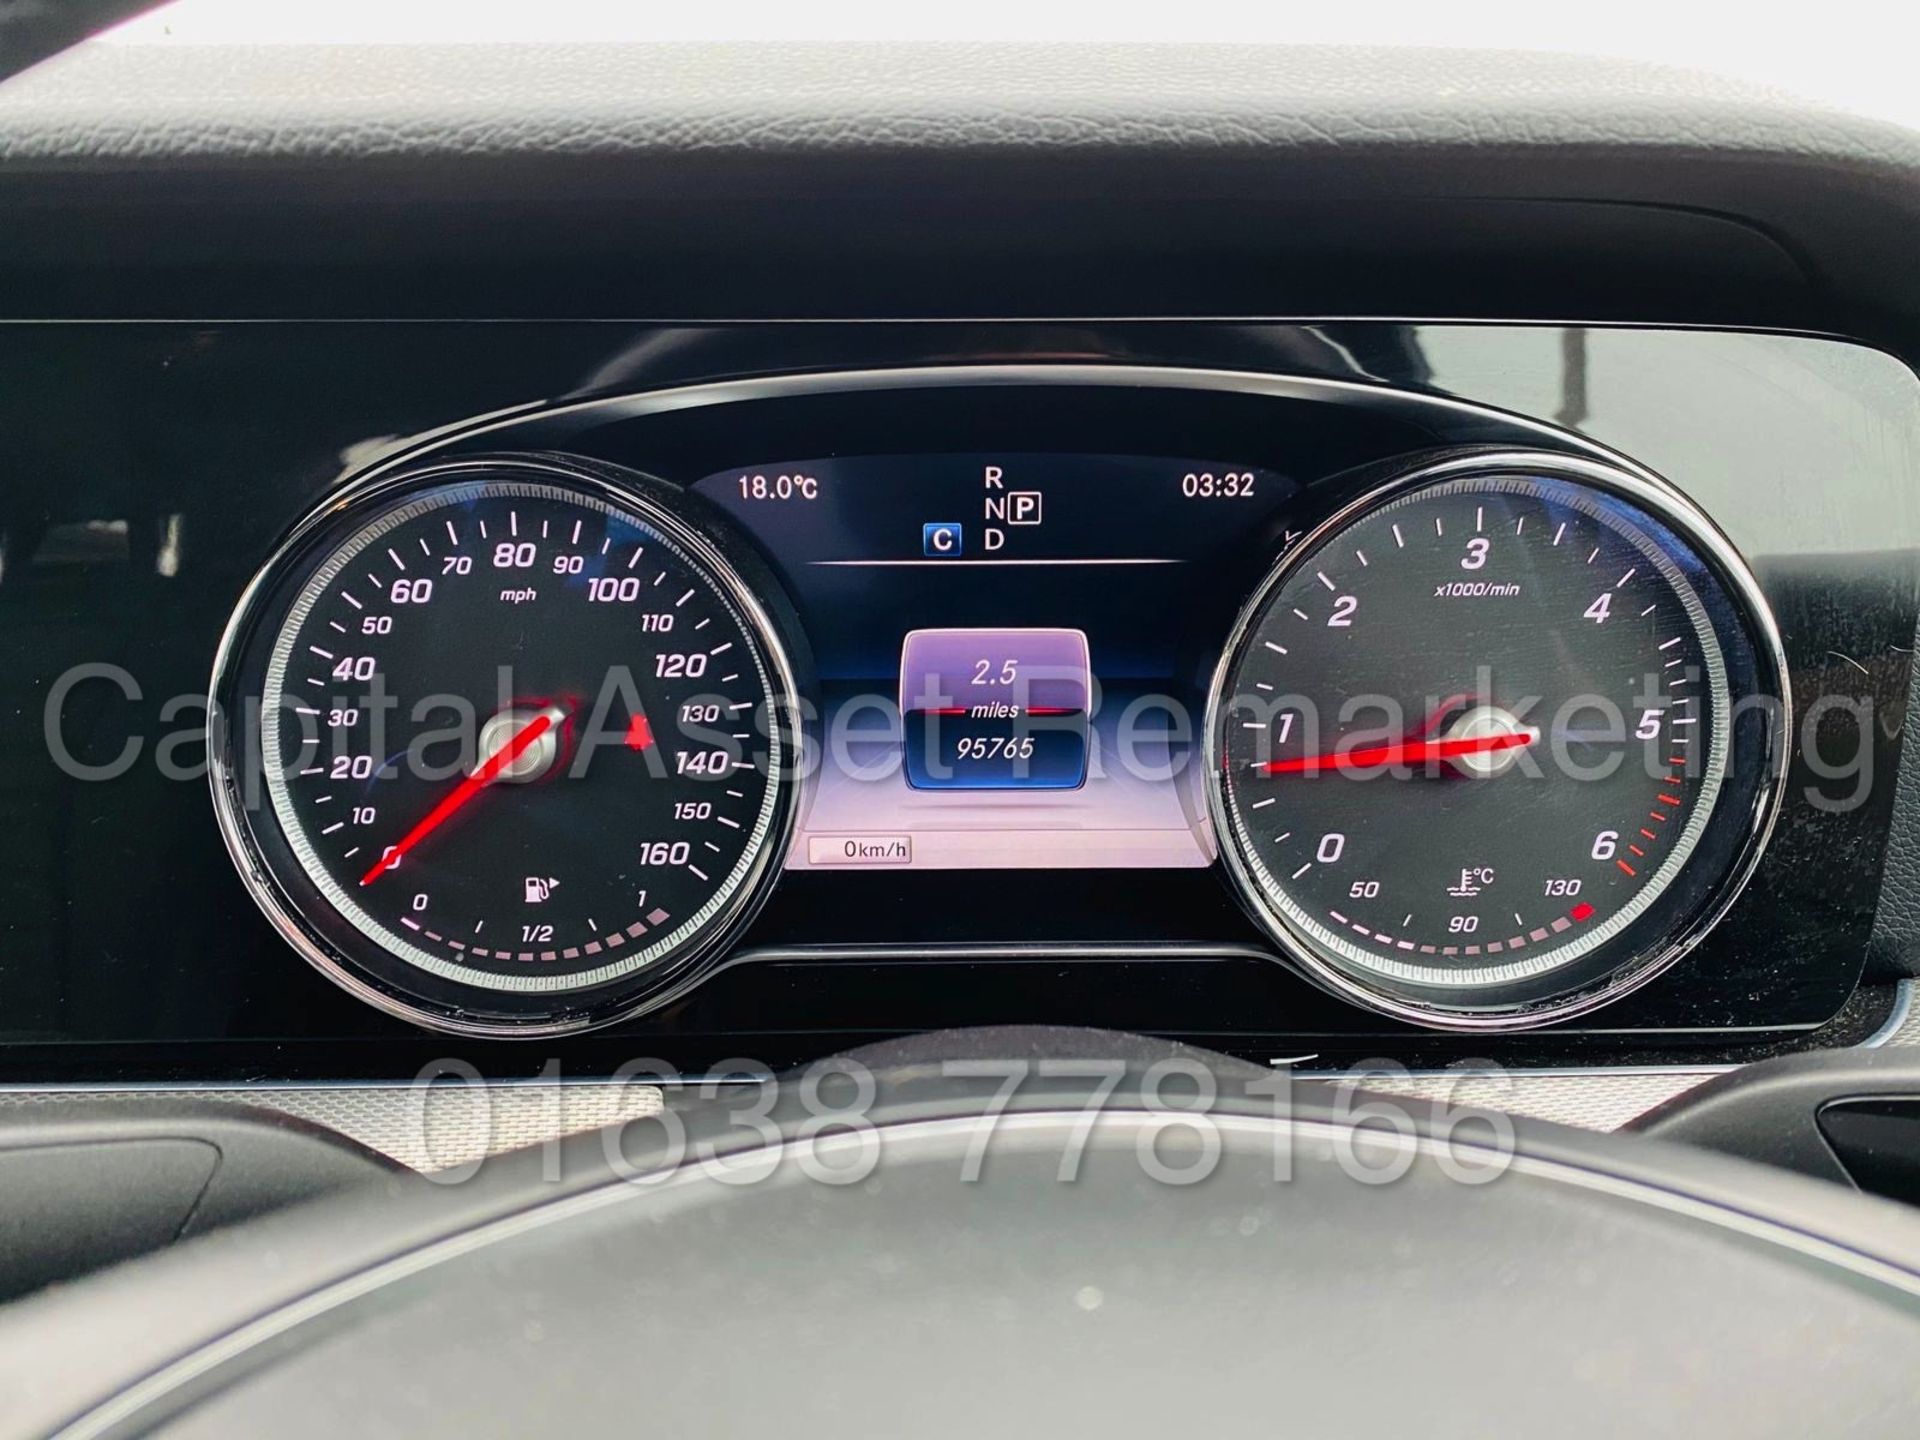 (ON SALE) MERCEDES-BENZ E220D *SALOON* (2018 - NEW MODEL) '9-G TRONIC AUTO - LEATHER - SAT NAV' - Image 52 of 52